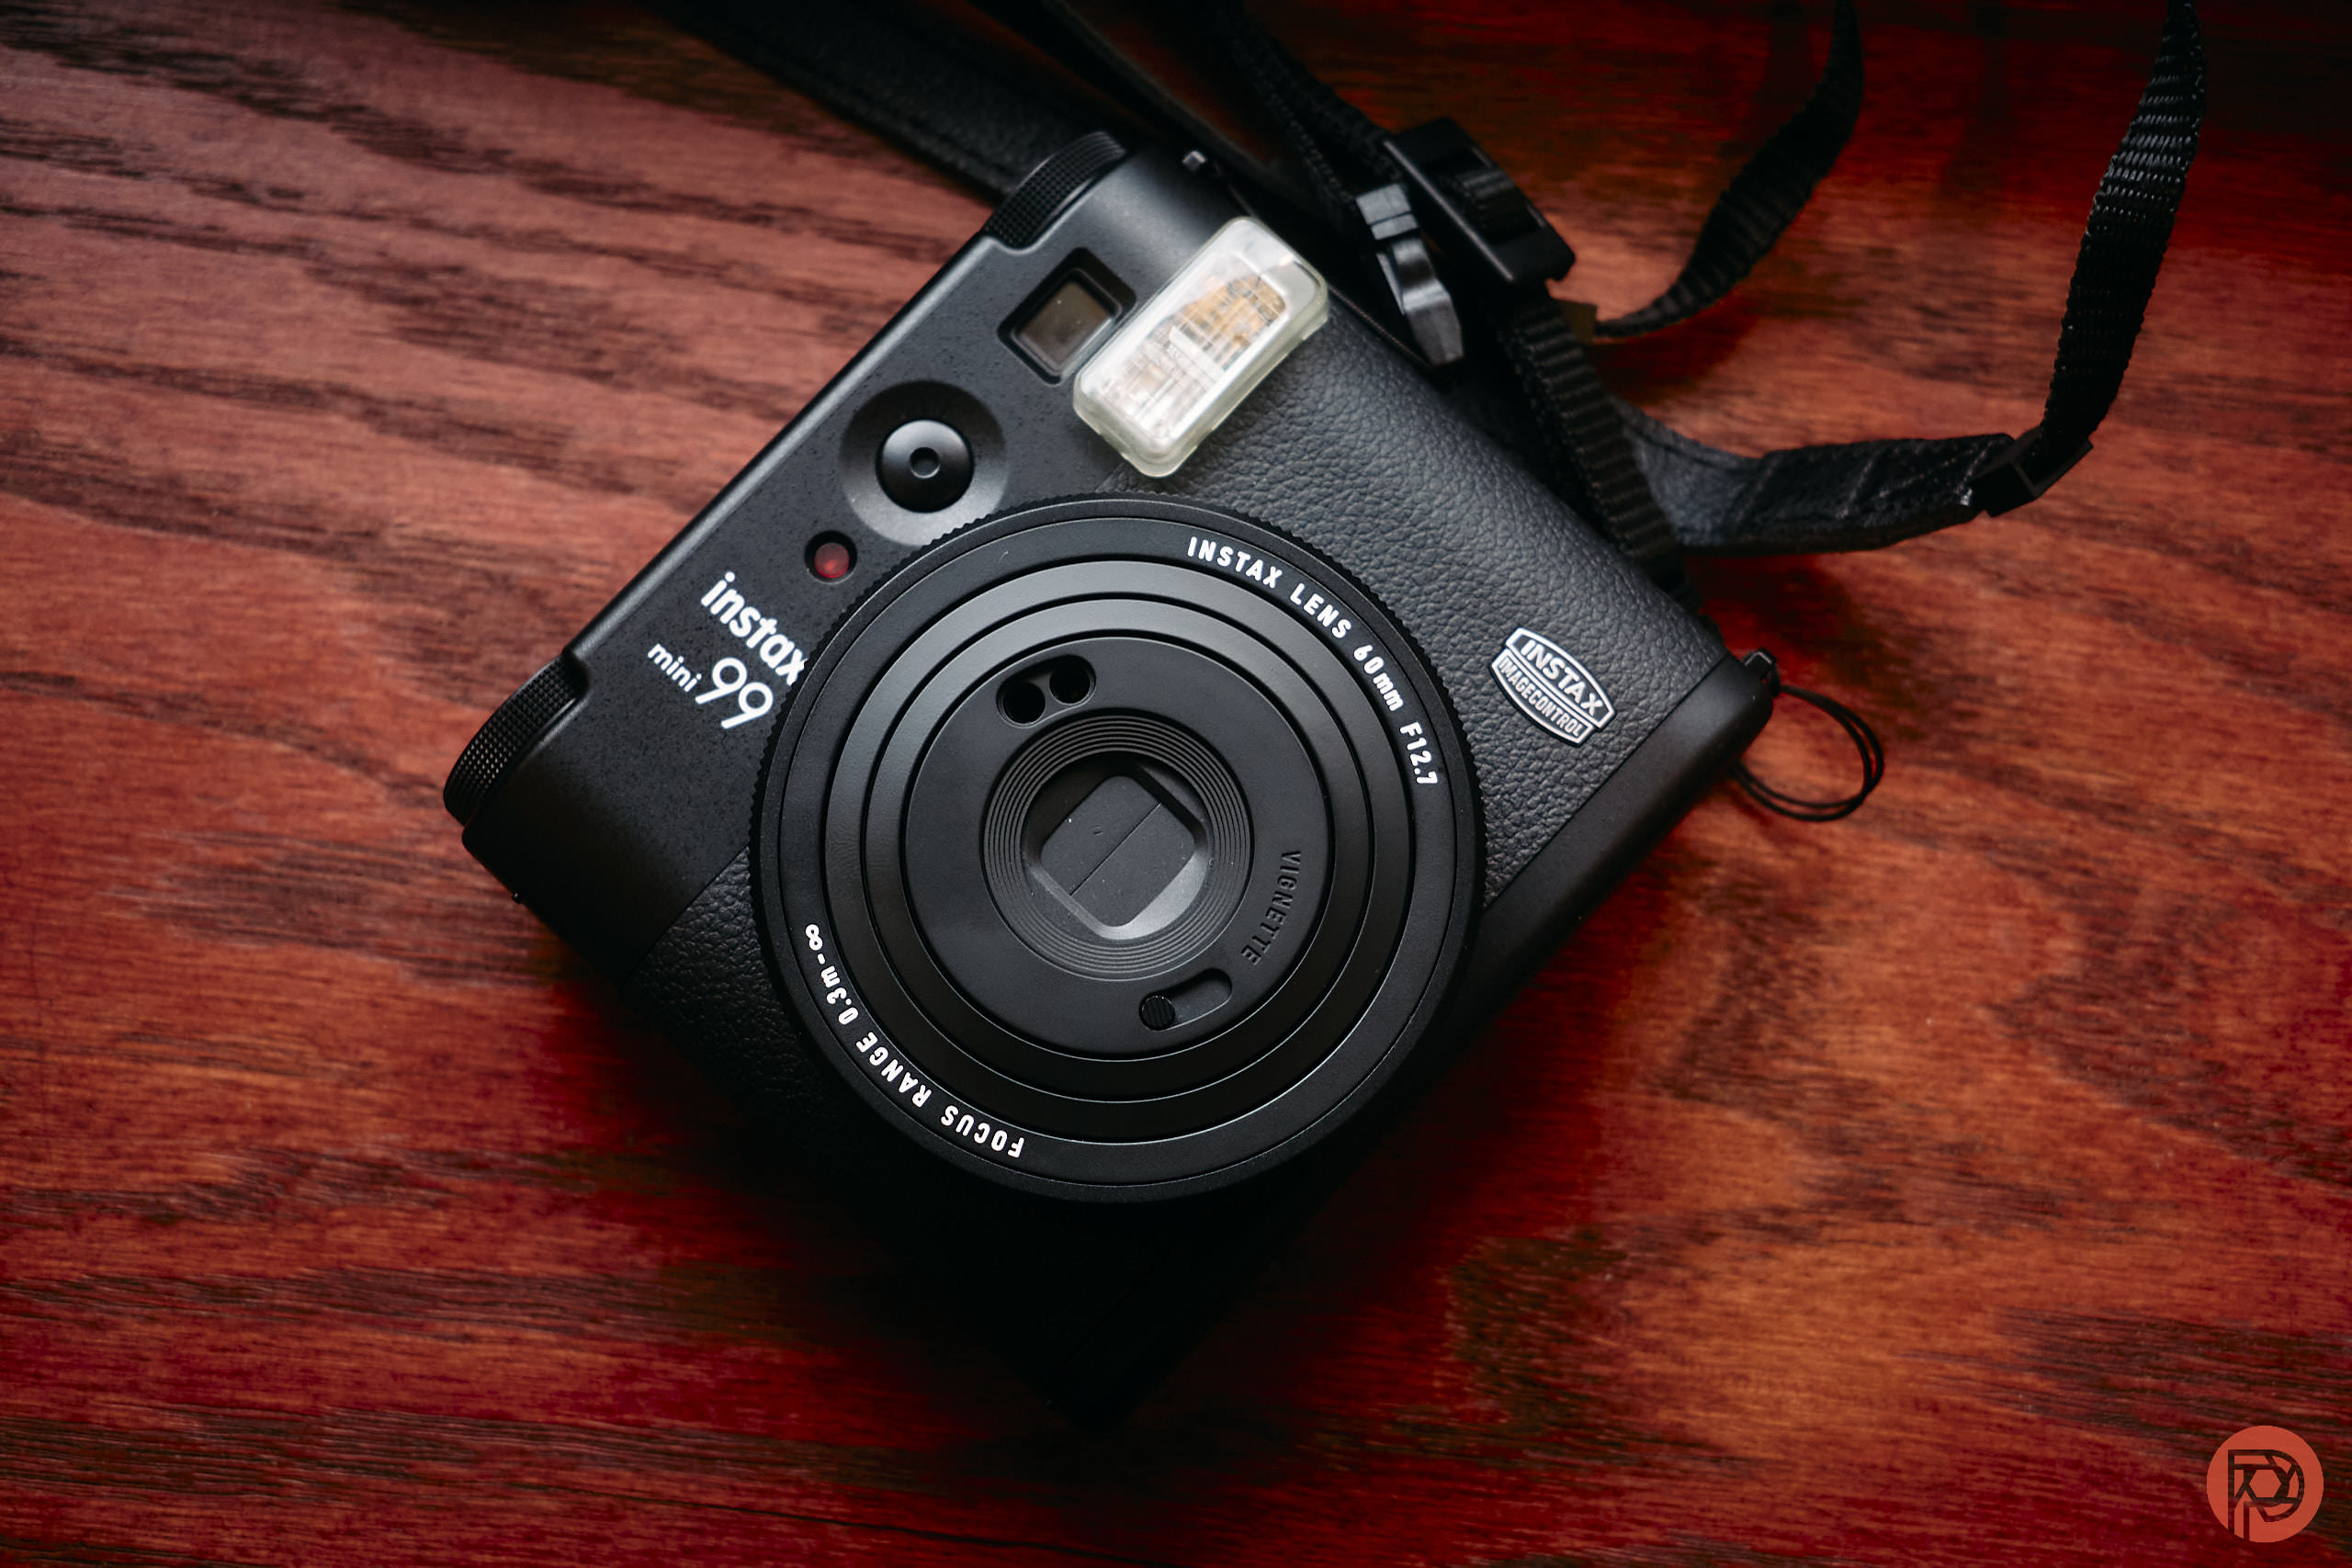 Fujifilm Instax Mini 99 Review: Instax for Passionate Photographers